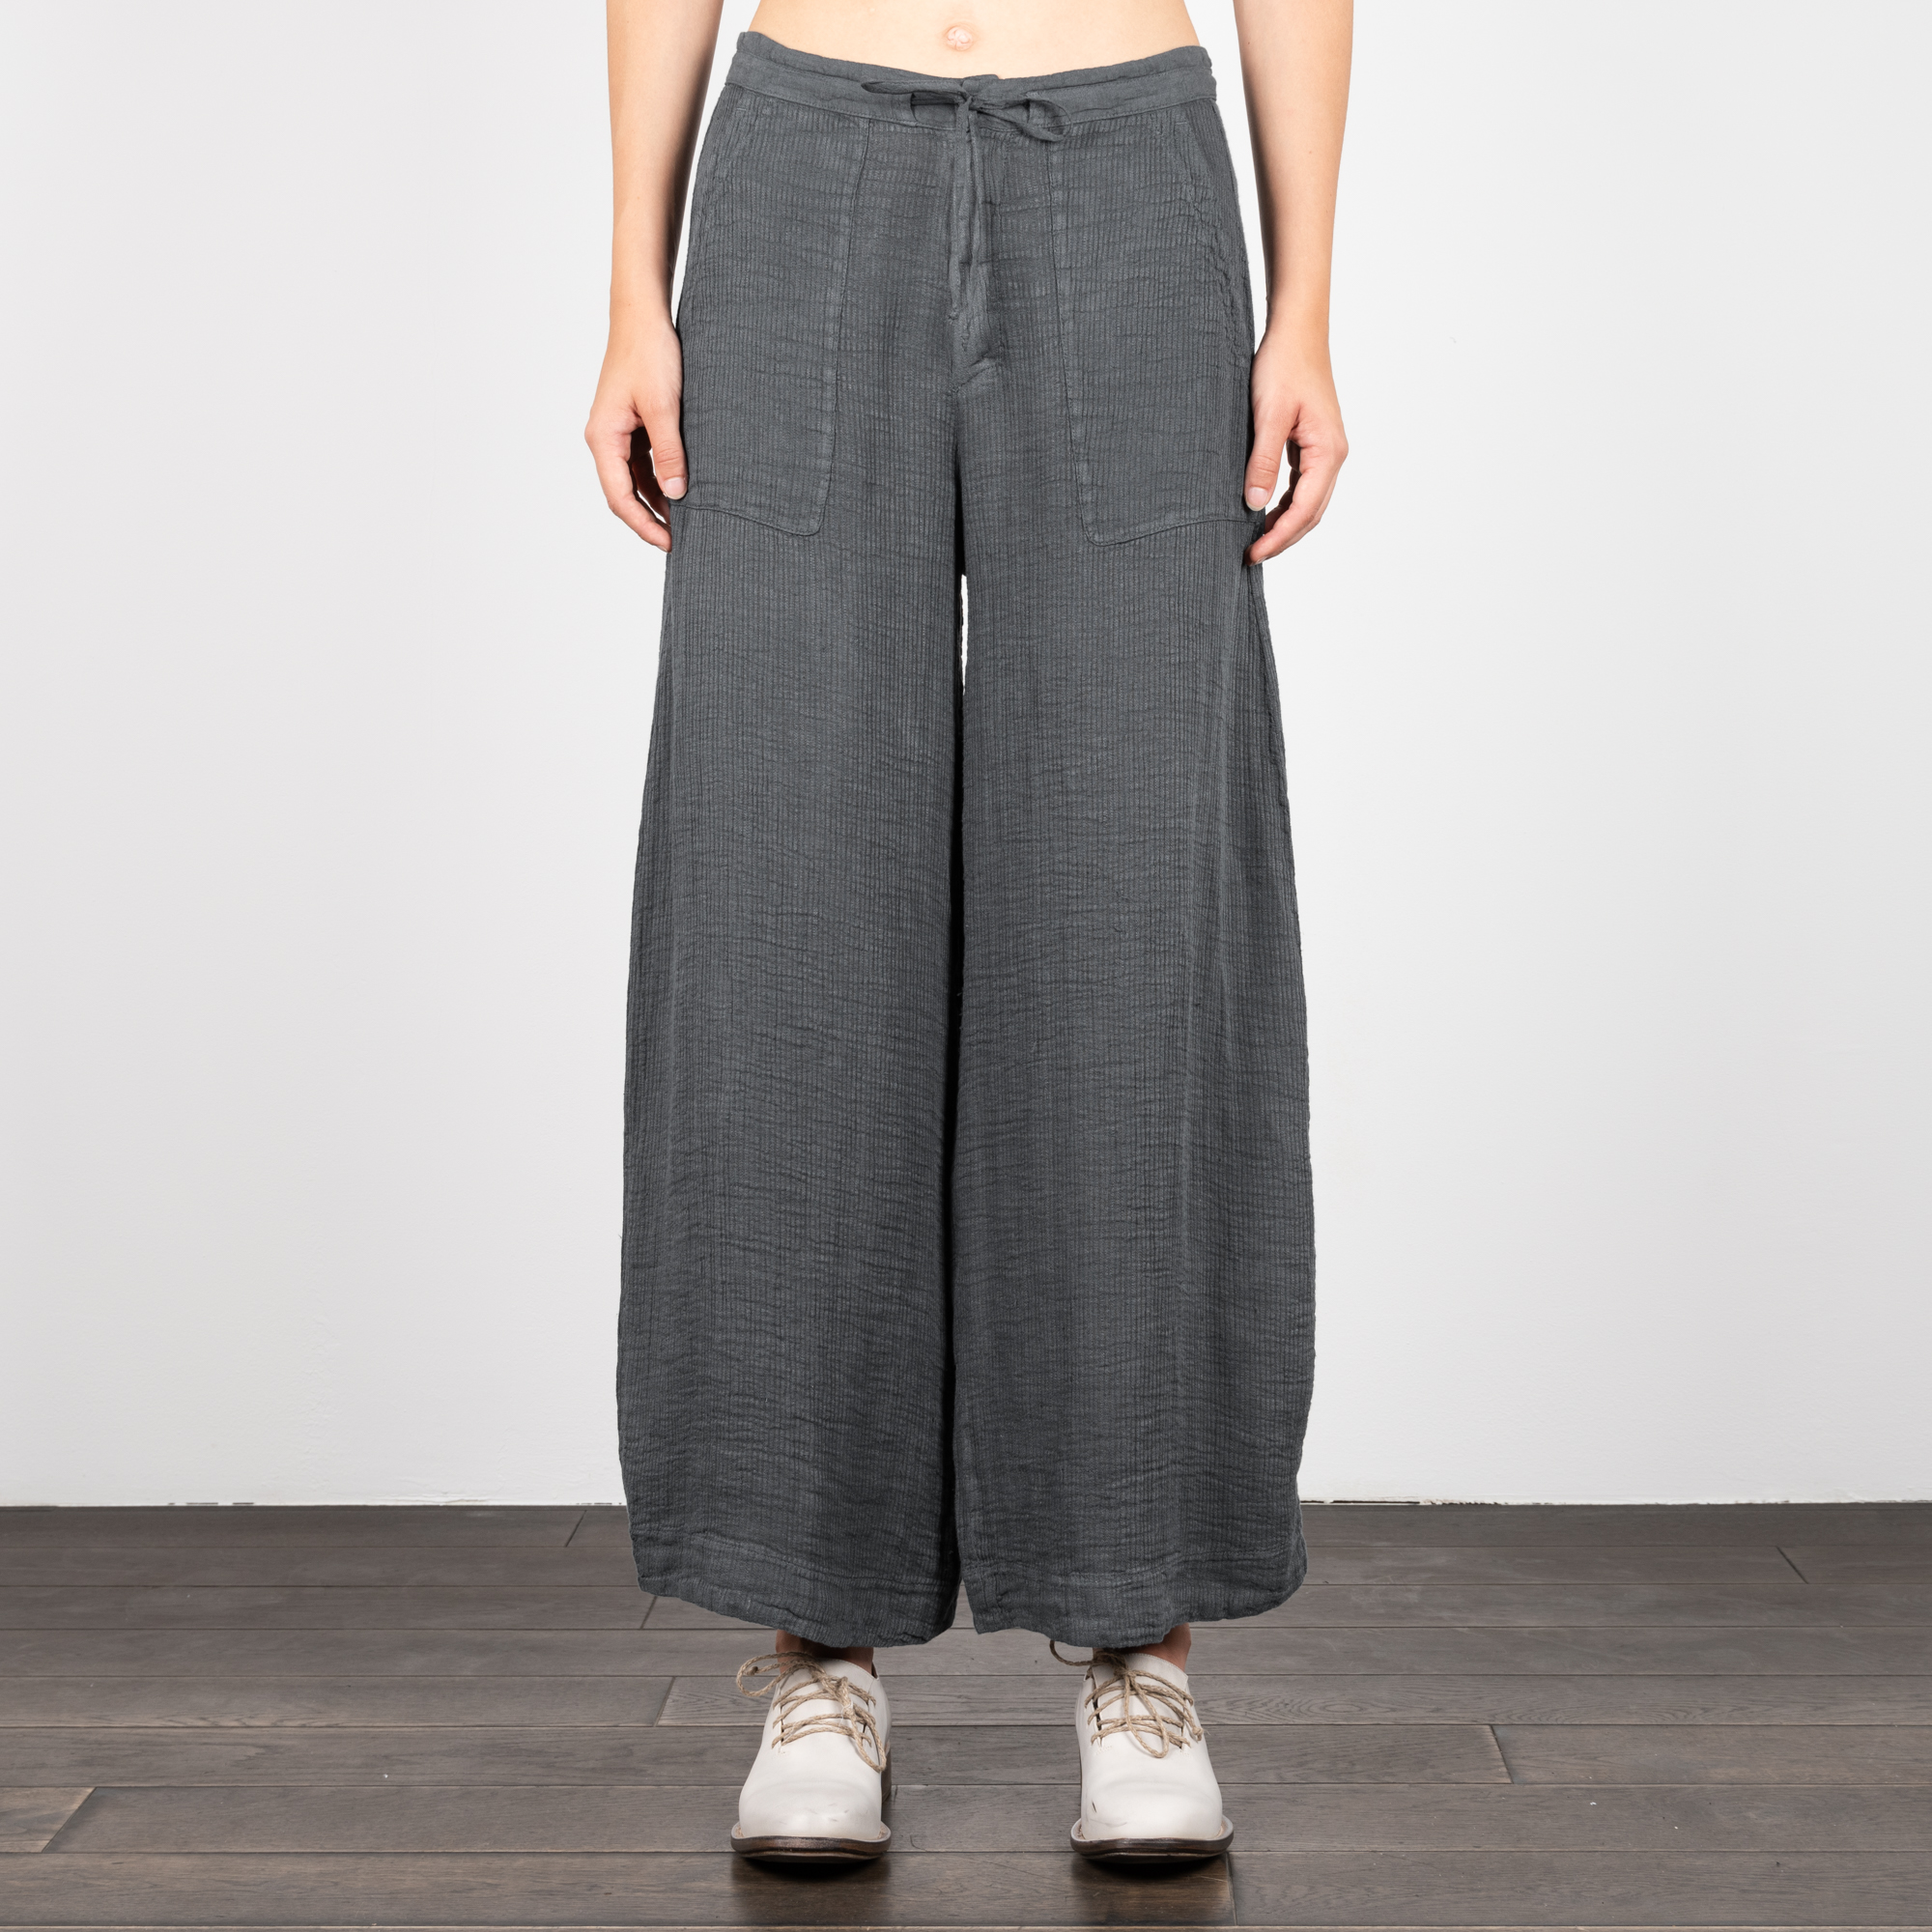 FORGED GREY WIDE LEG PANTS|wolfensson